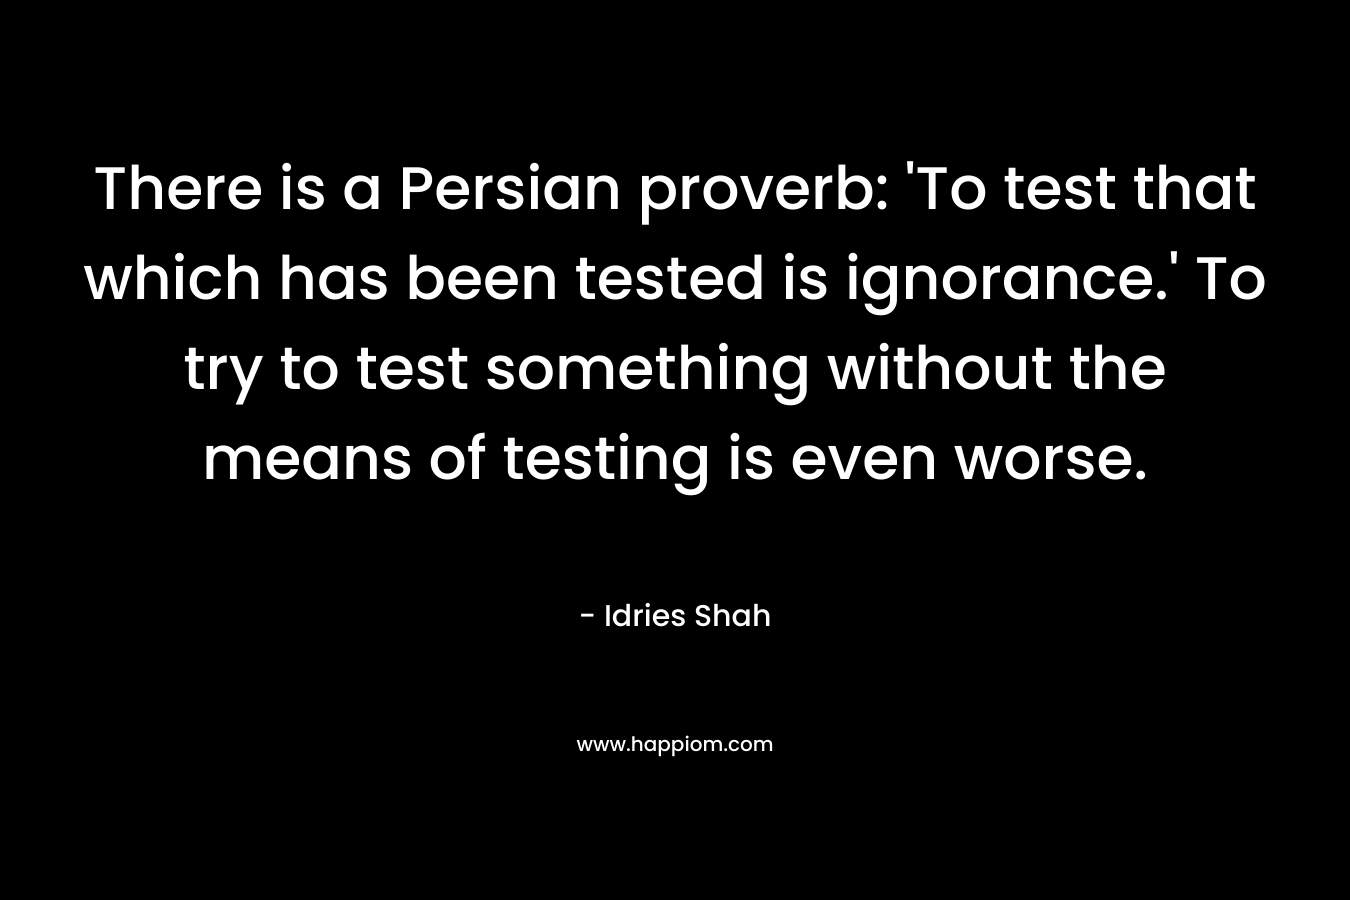 There is a Persian proverb: ‘To test that which has been tested is ignorance.’ To try to test something without the means of testing is even worse. – Idries Shah